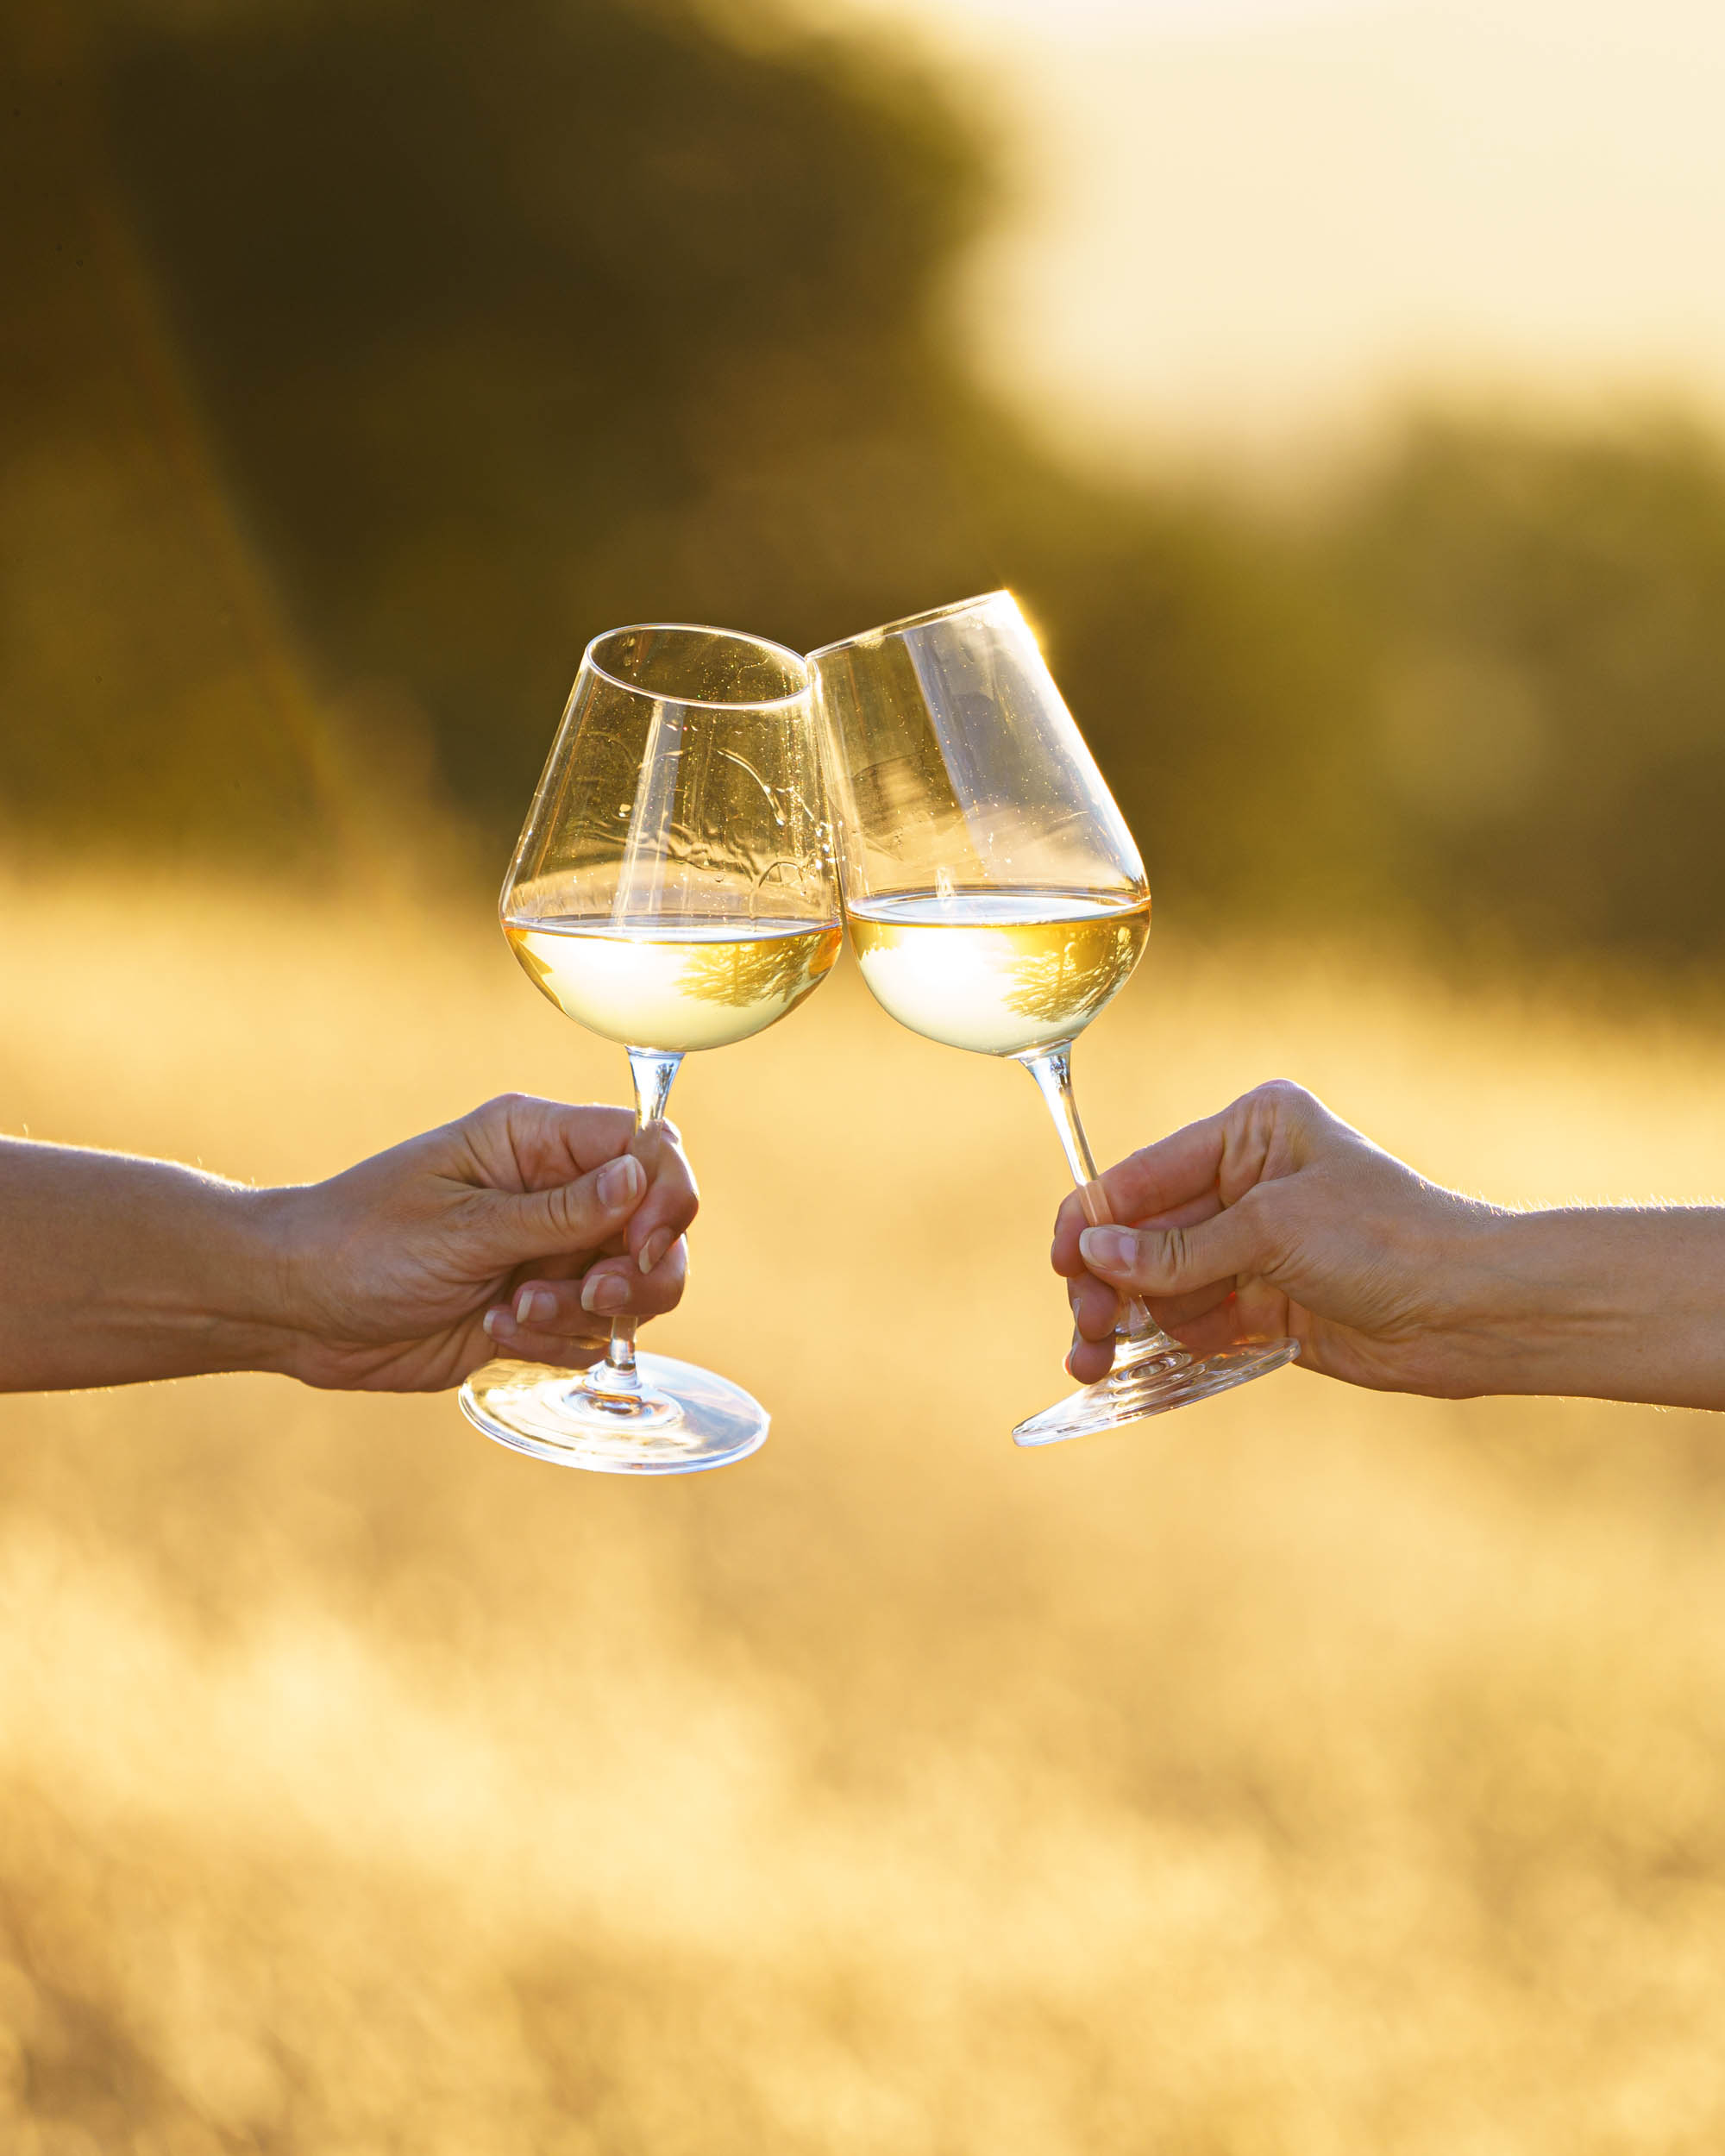 Two people tapping wine glasses filled with white wine.